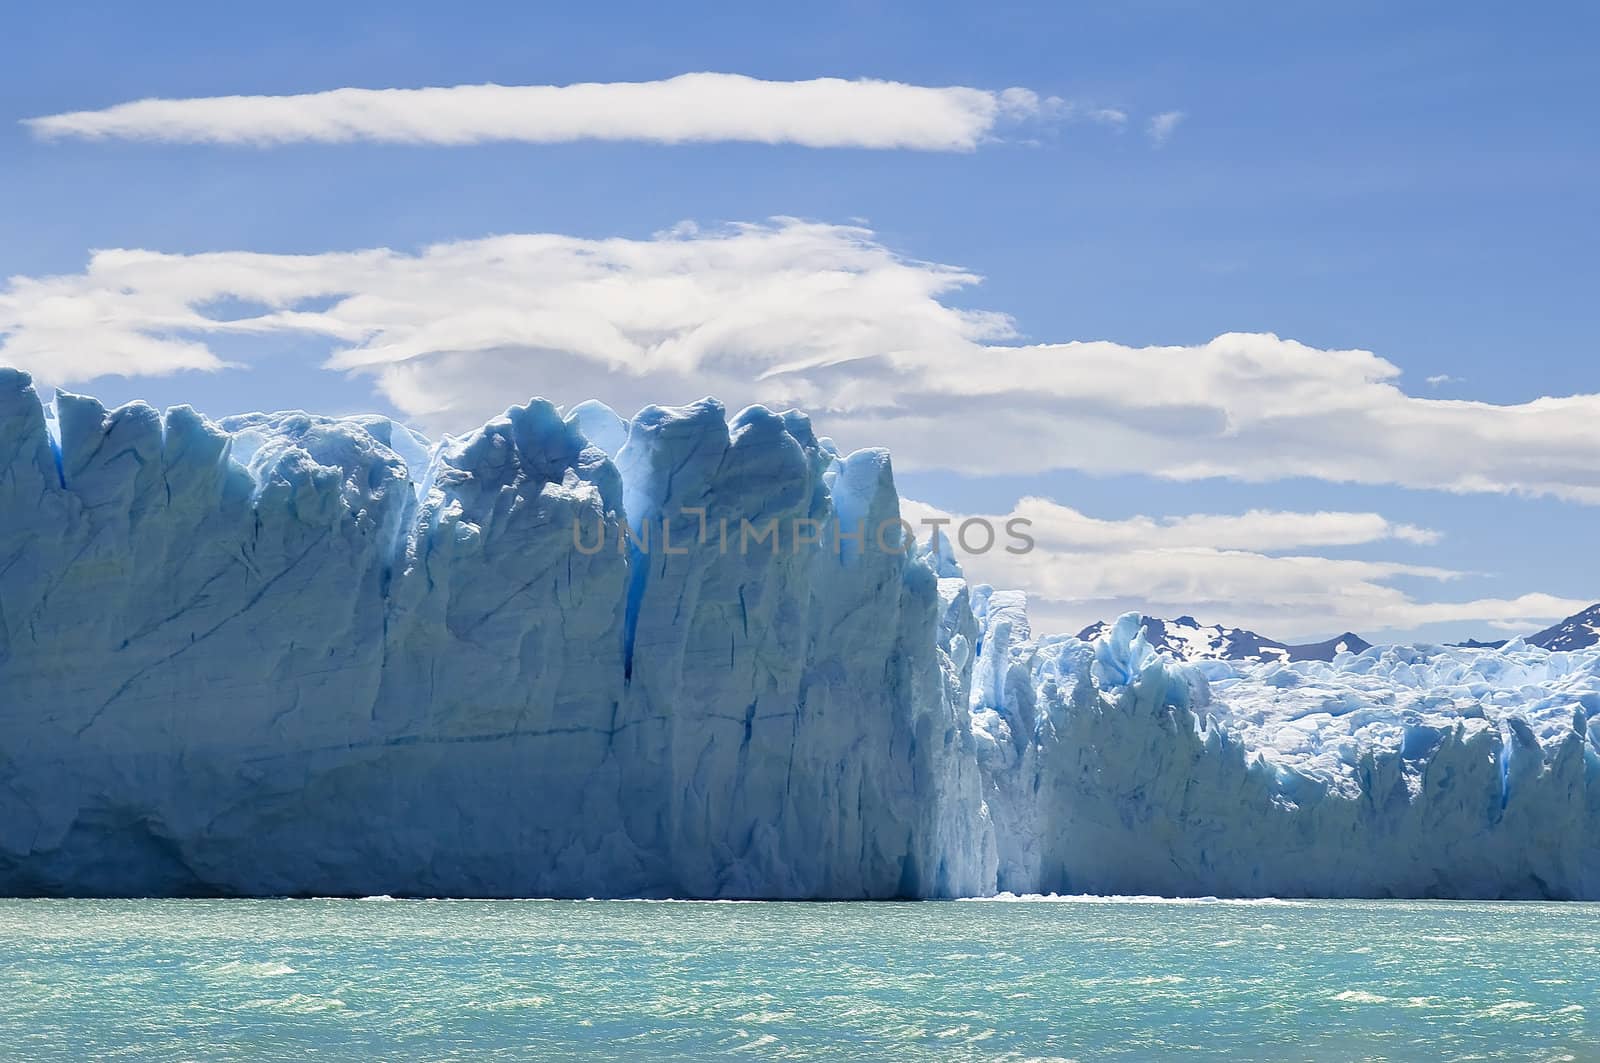 ice mountains of Argentina by irisphoto4